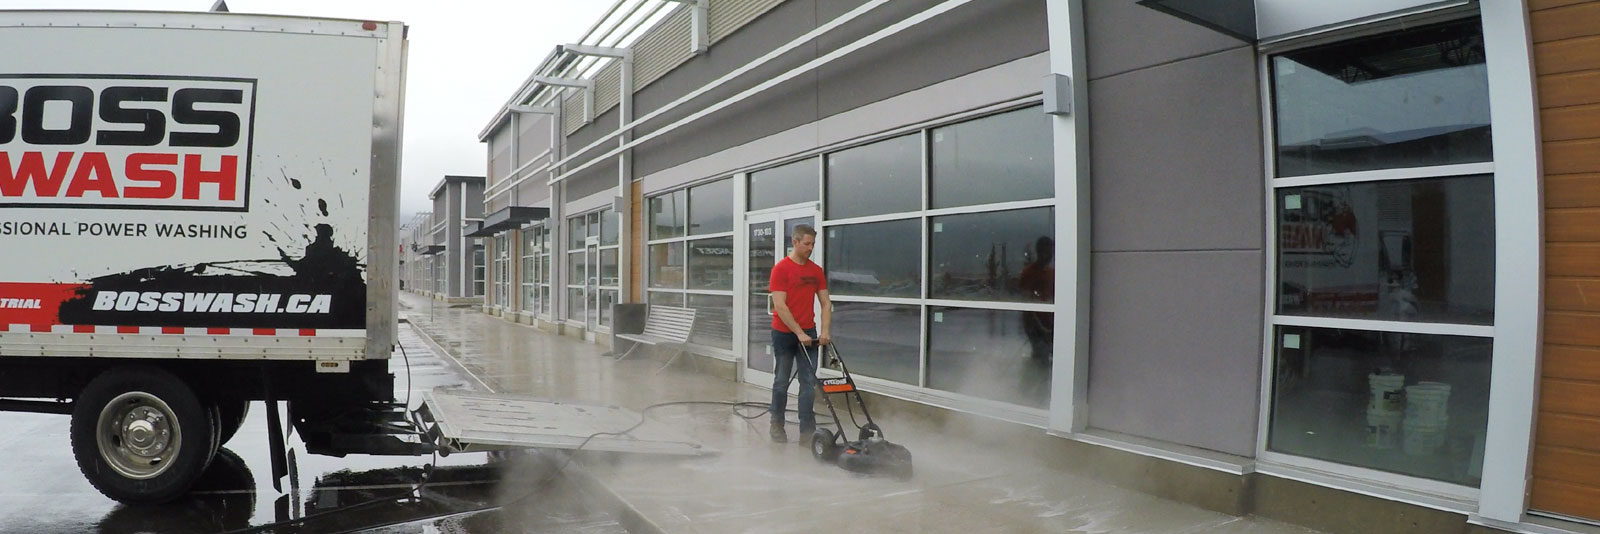 employee pressure cleaning the sidewalk in front of a store